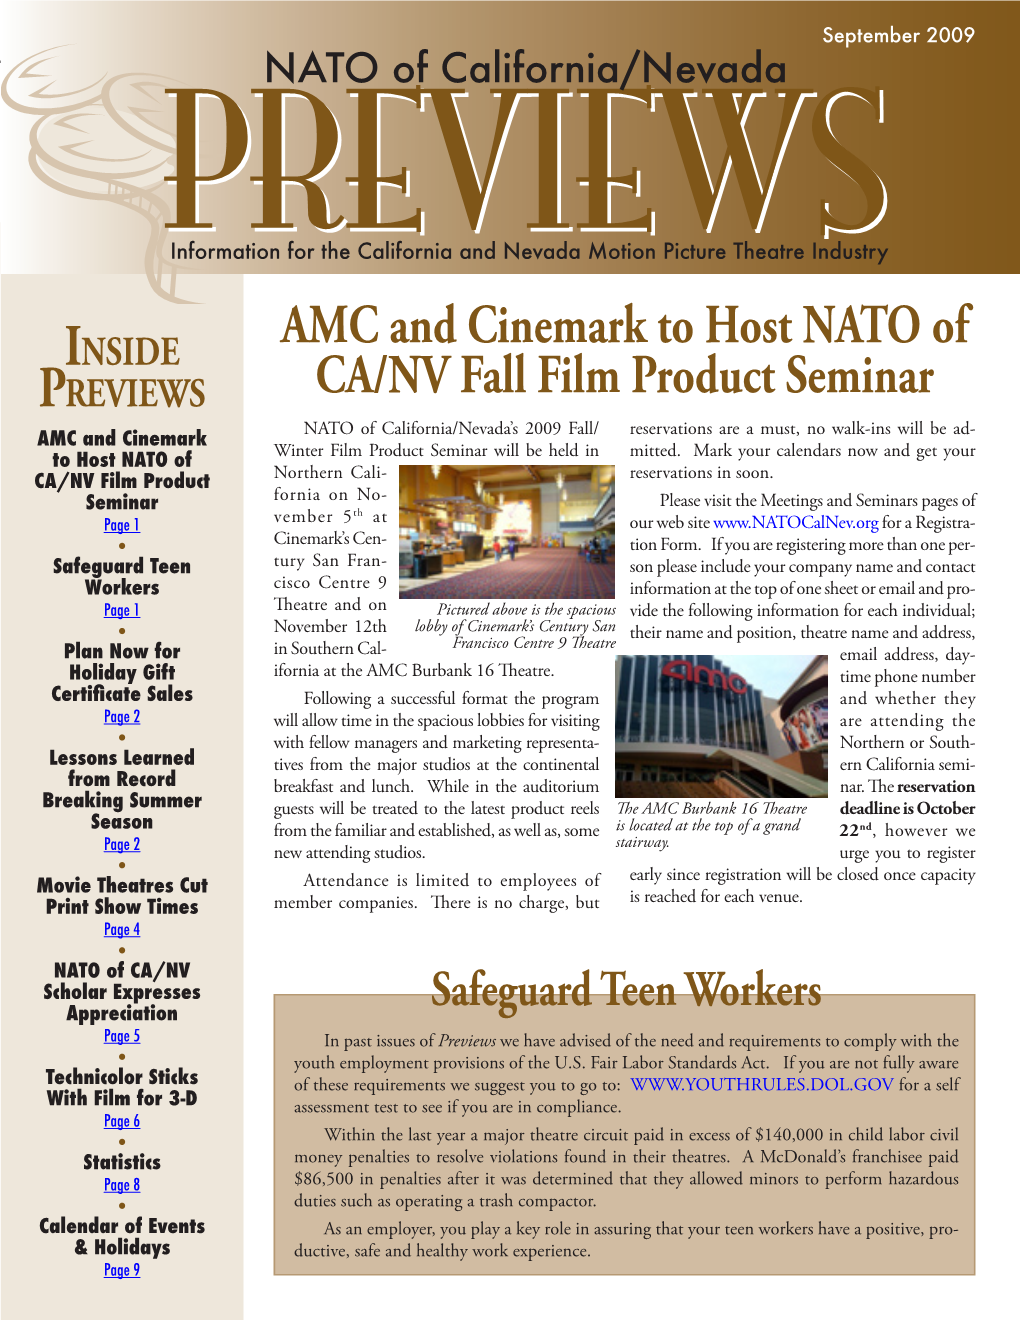 AMC and Cinemark to Host NATO of CA/NV Fall Film Product Seminar